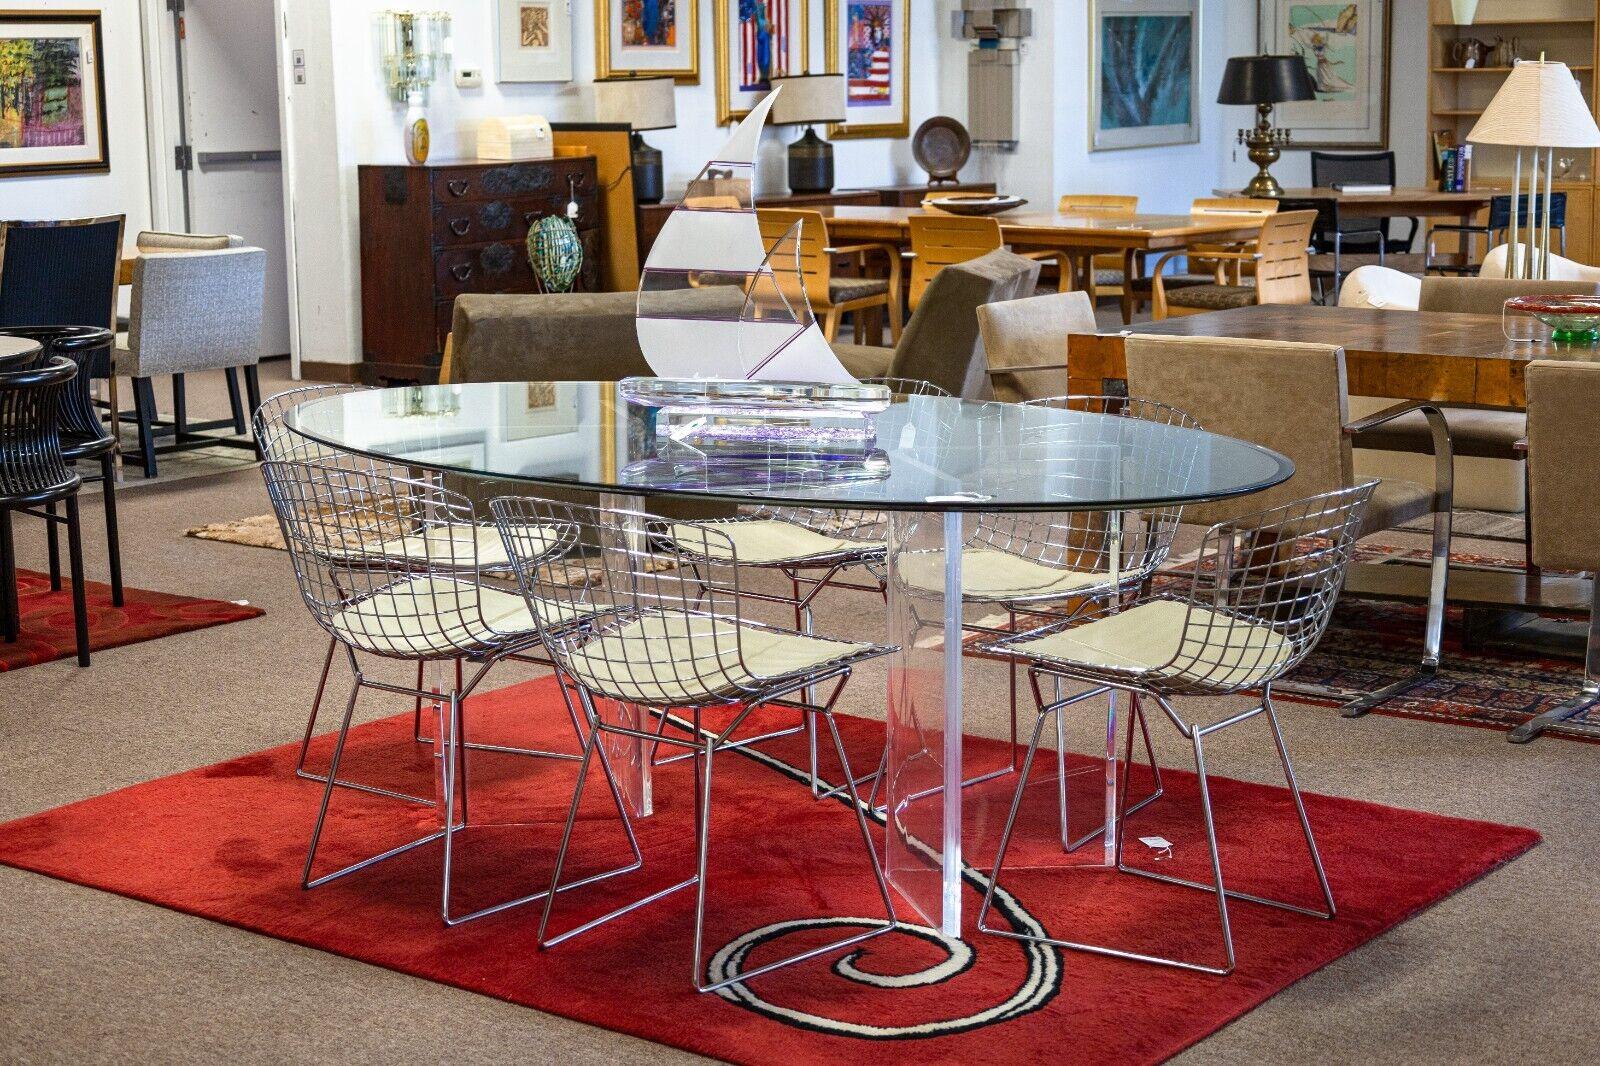 An oval and lucite dining table. This is a gorgeous contemporary modern dining table with a simple design, but a stunning presentation. This table features a very large oval glass top with a semi-smoked finish. Supporting the weight of the glass top